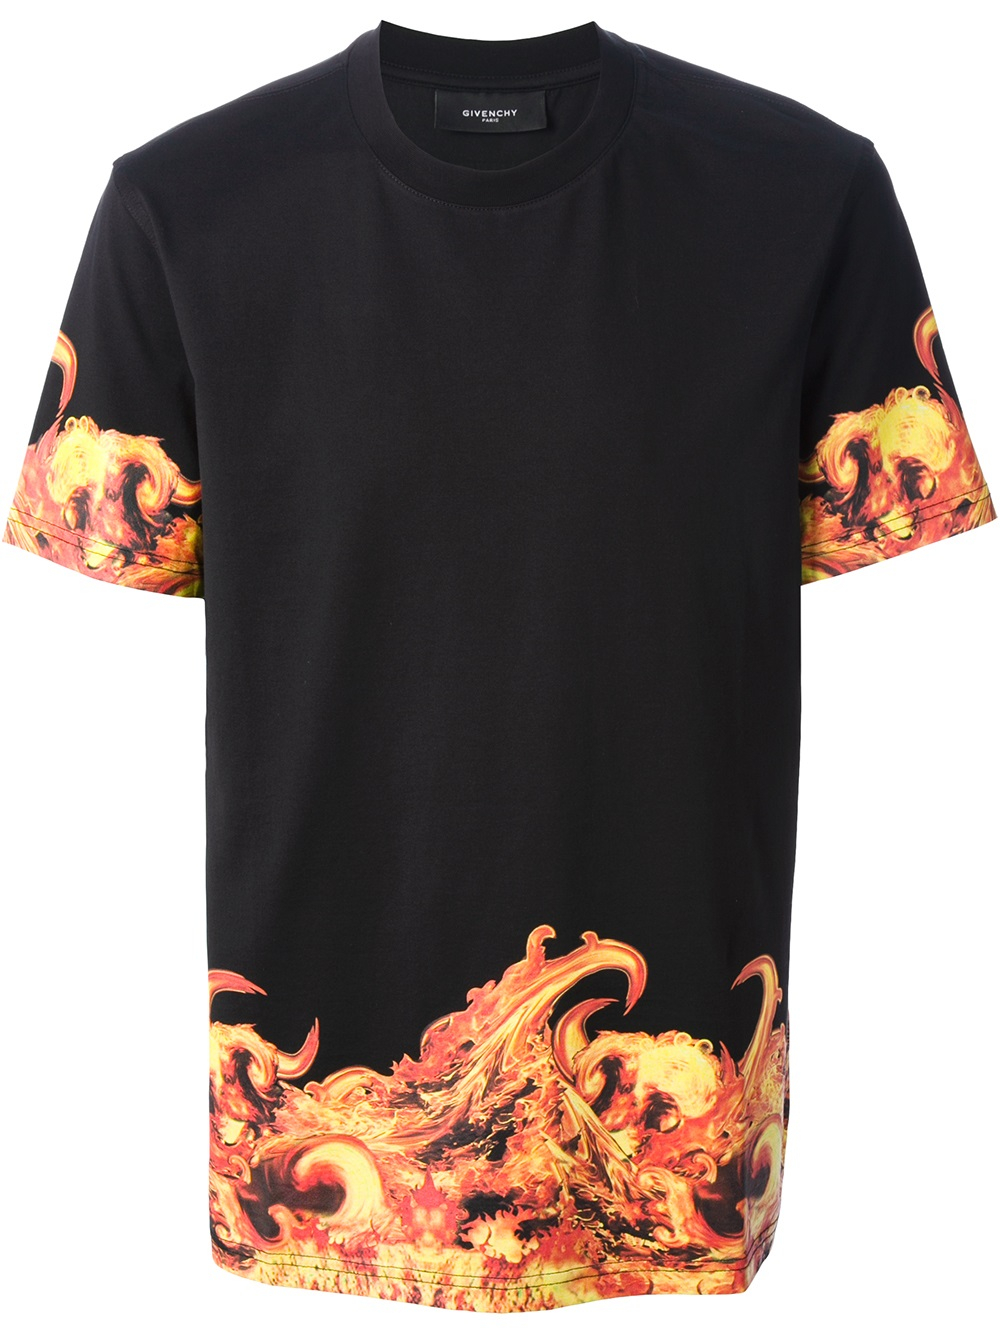 Givenchy Flame Print Tshirt in Black 